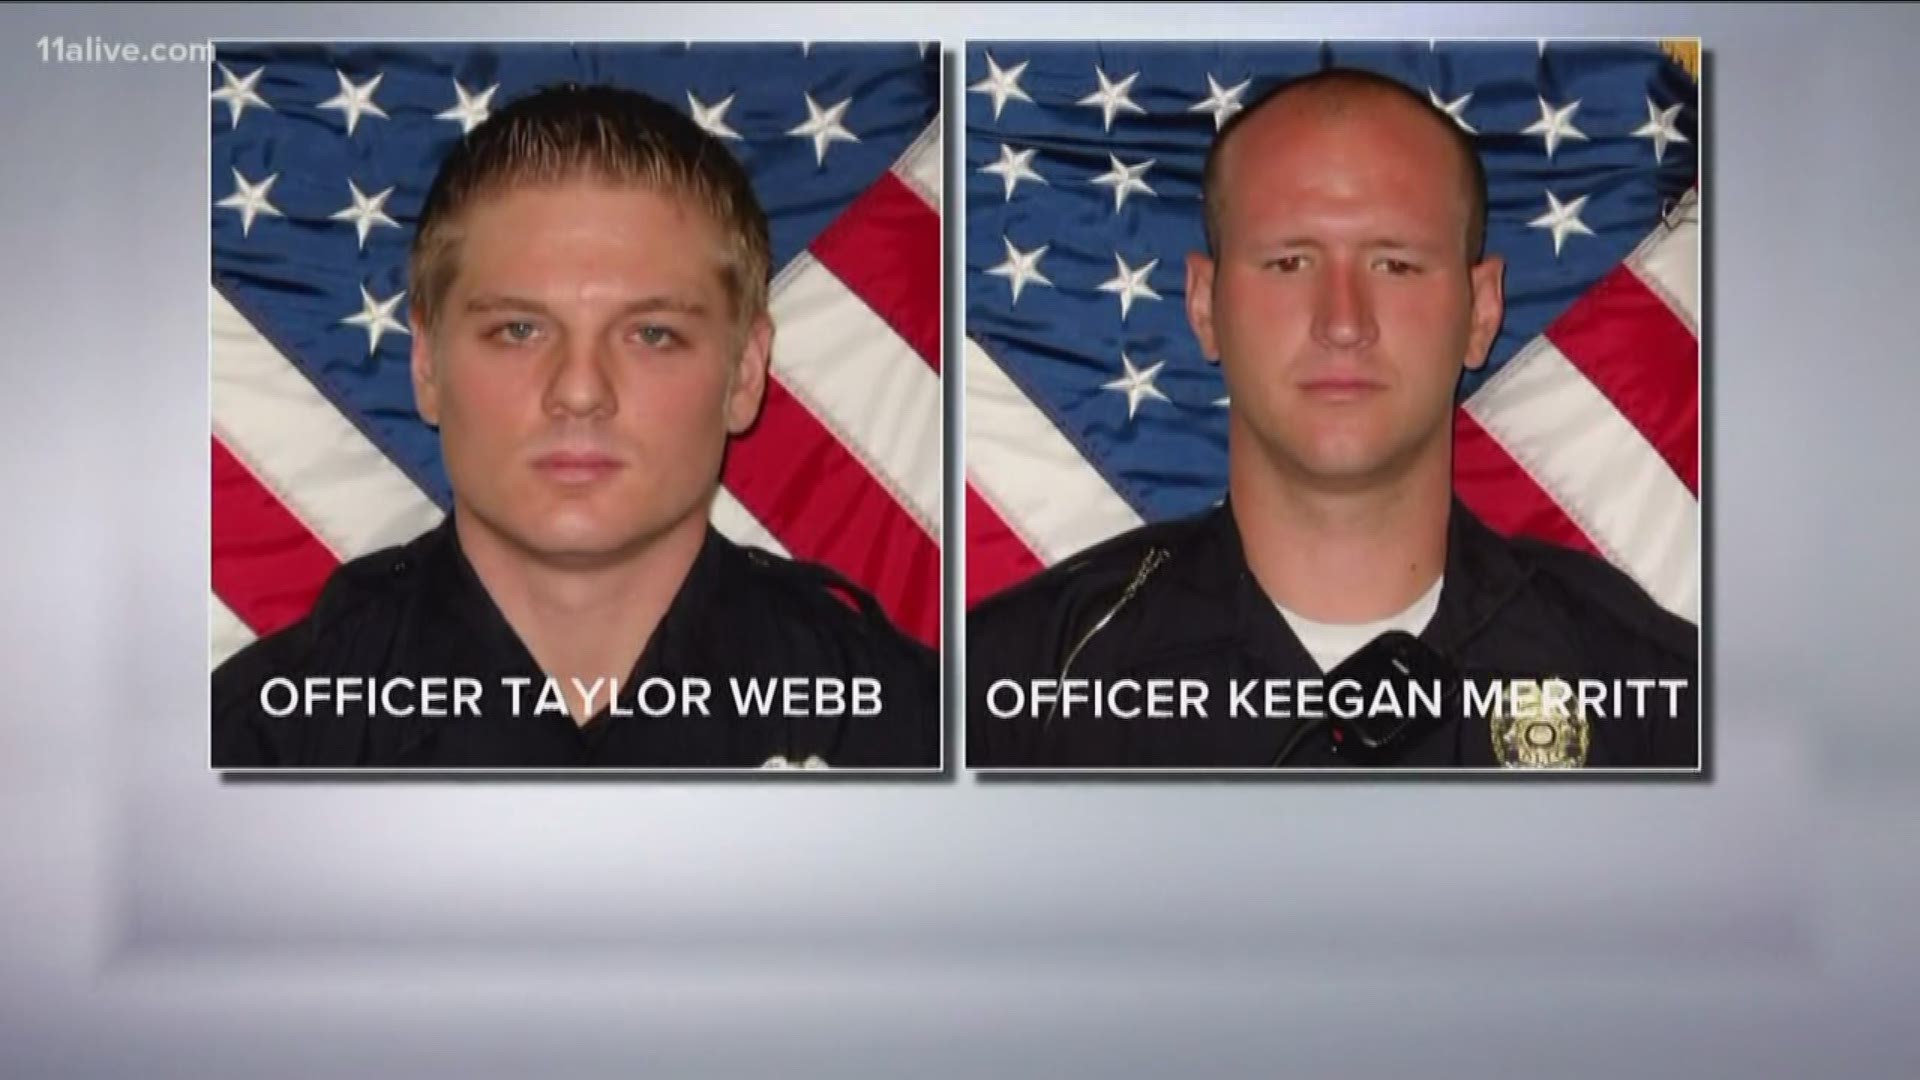 Henry County Police Chief Mark Amerman identified the injured officers as Keegan Merritt and Taylor Webb. Both are said to be 7-year veterans of the force and were shot at after responding to a welfare check on a pregnant woman, who was found dead inside the home along with her teenage son.